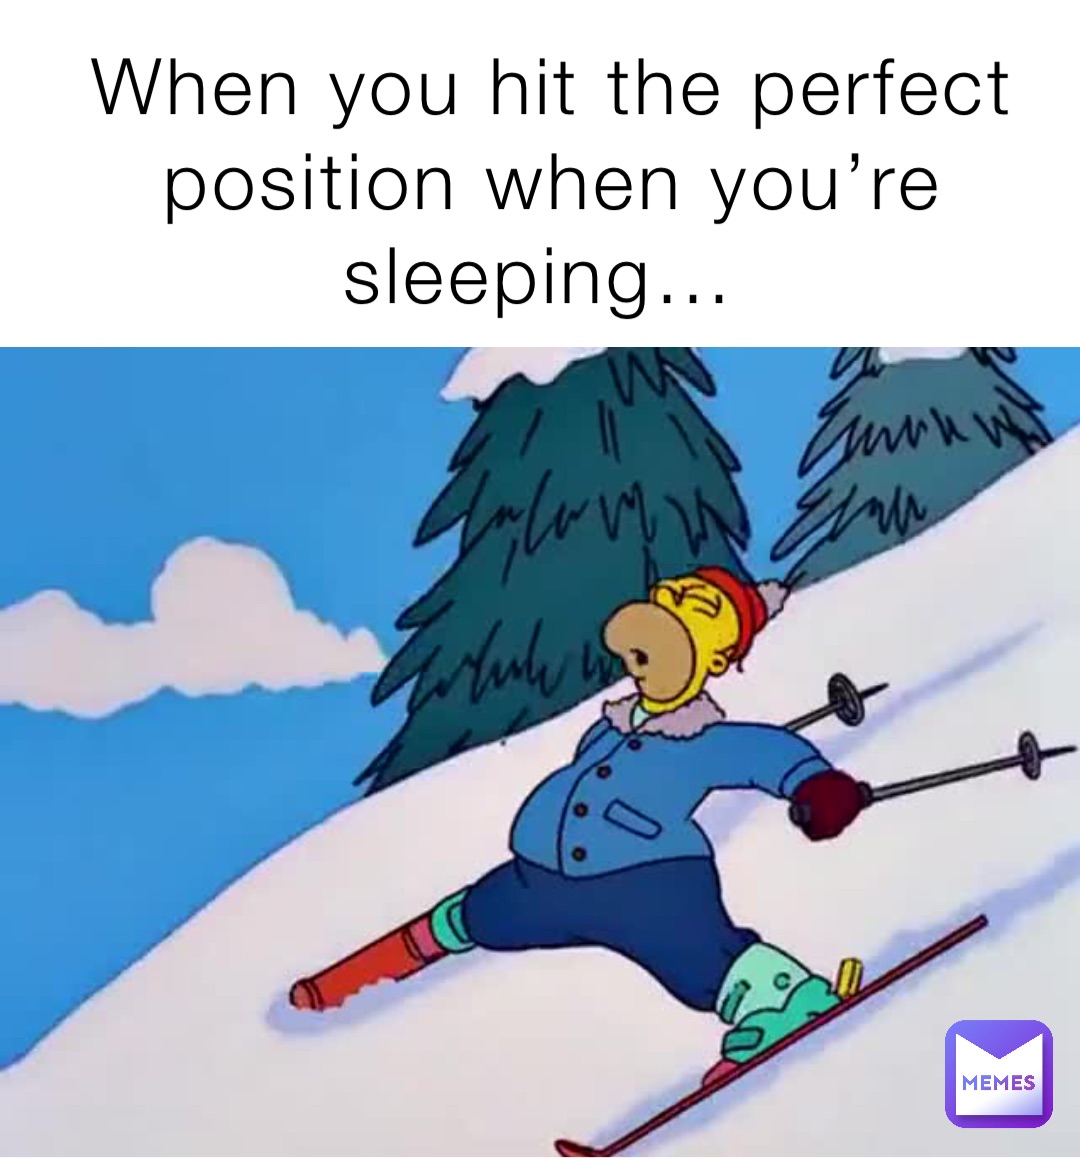 When you hit the perfect position when you’re sleeping…